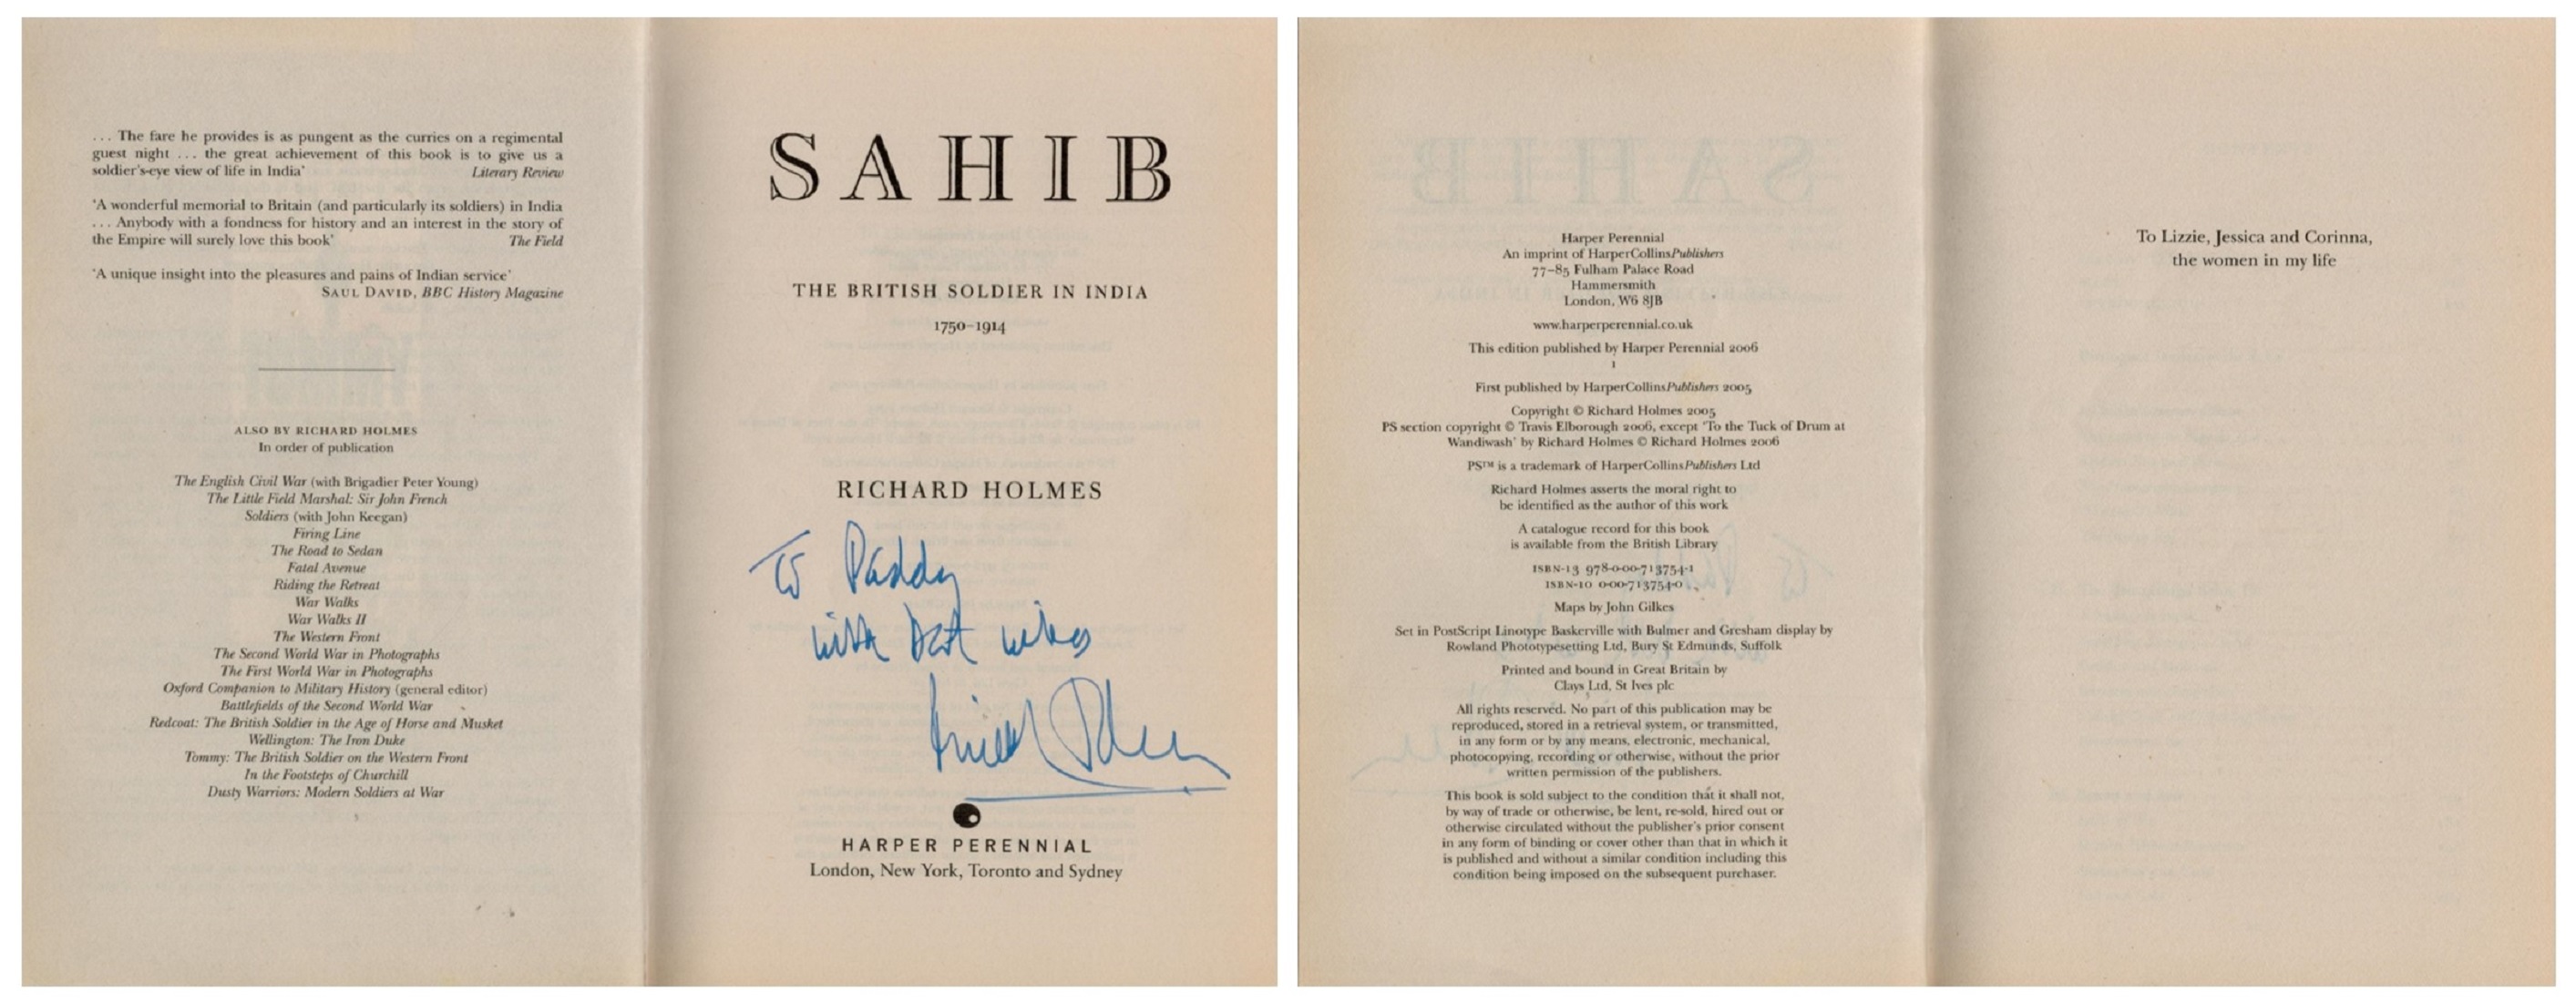 SAHIB The British Soldier In India 1750-1914 Signed by Author Richard Holmes Paperback book. - Image 6 of 6